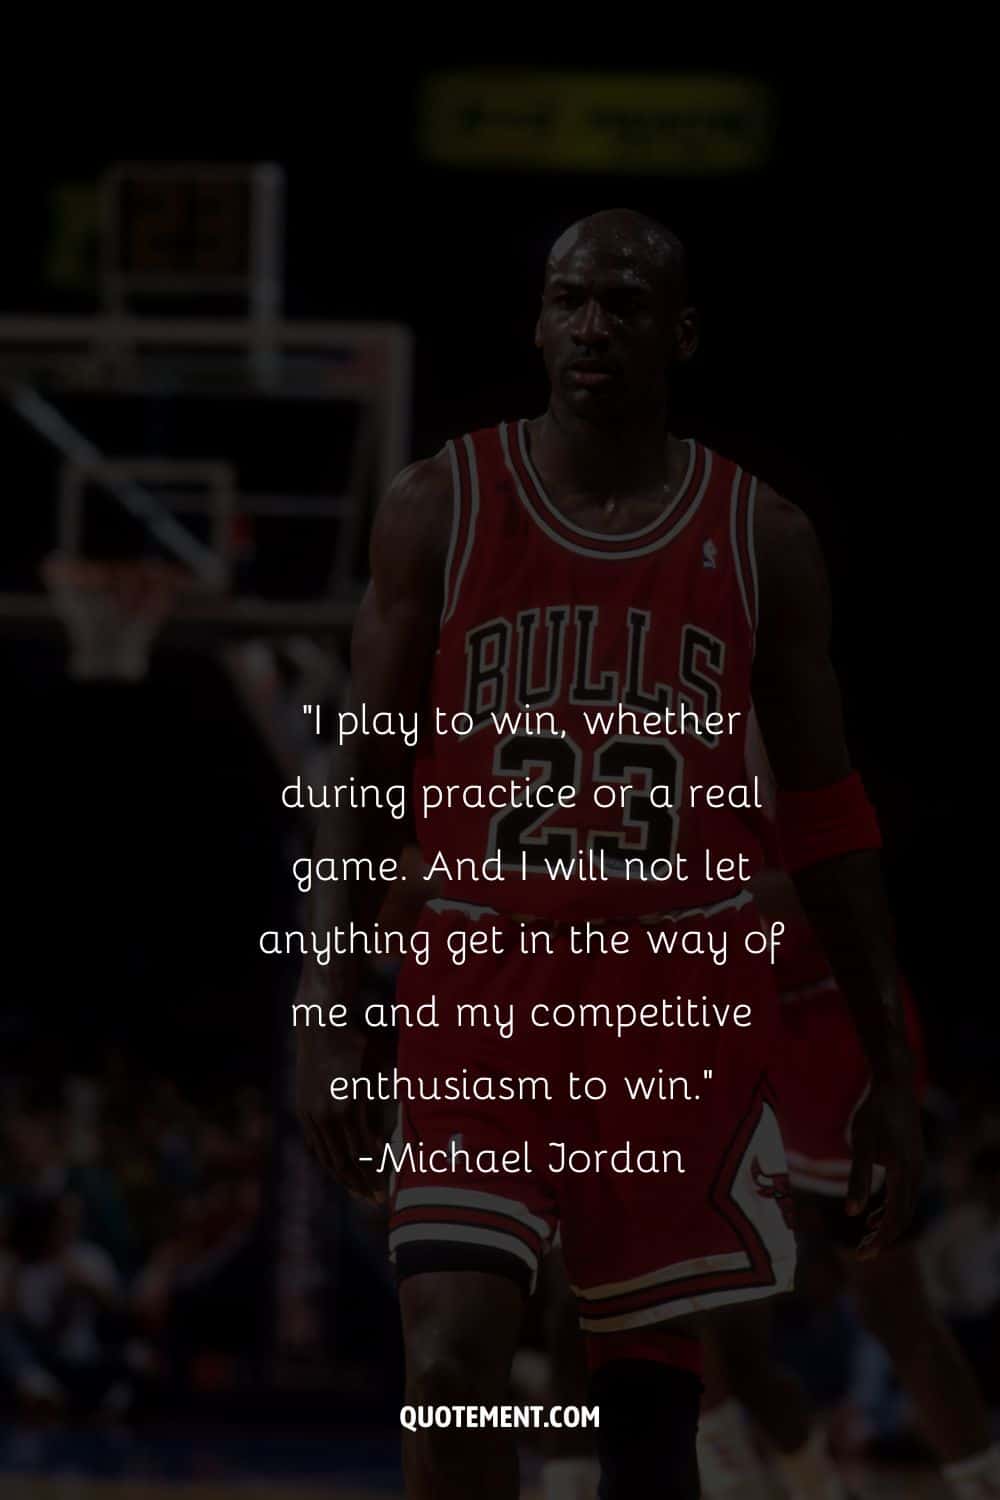 michael jordan image representing inspirational quote about confidence